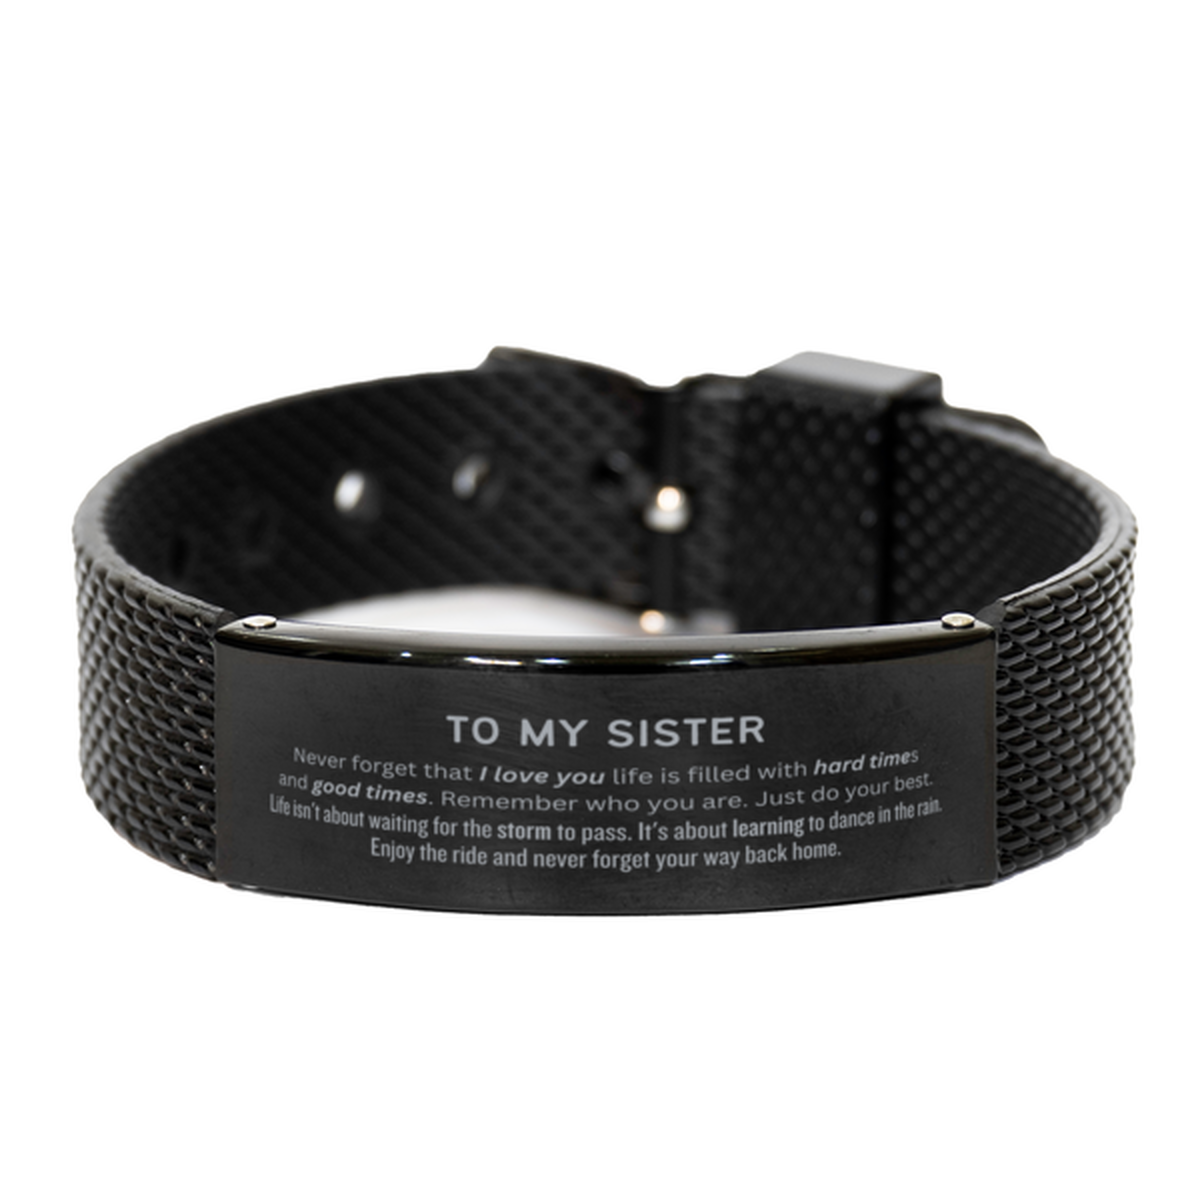 Christmas Sister Black Shark Mesh Bracelet Gifts, To My Sister Birthday Thank You Gifts For Sister, Graduation Unique Gifts For Sister To My Sister Never forget that I love you life is filled with hard times and good times. Remember who you are. Just do y